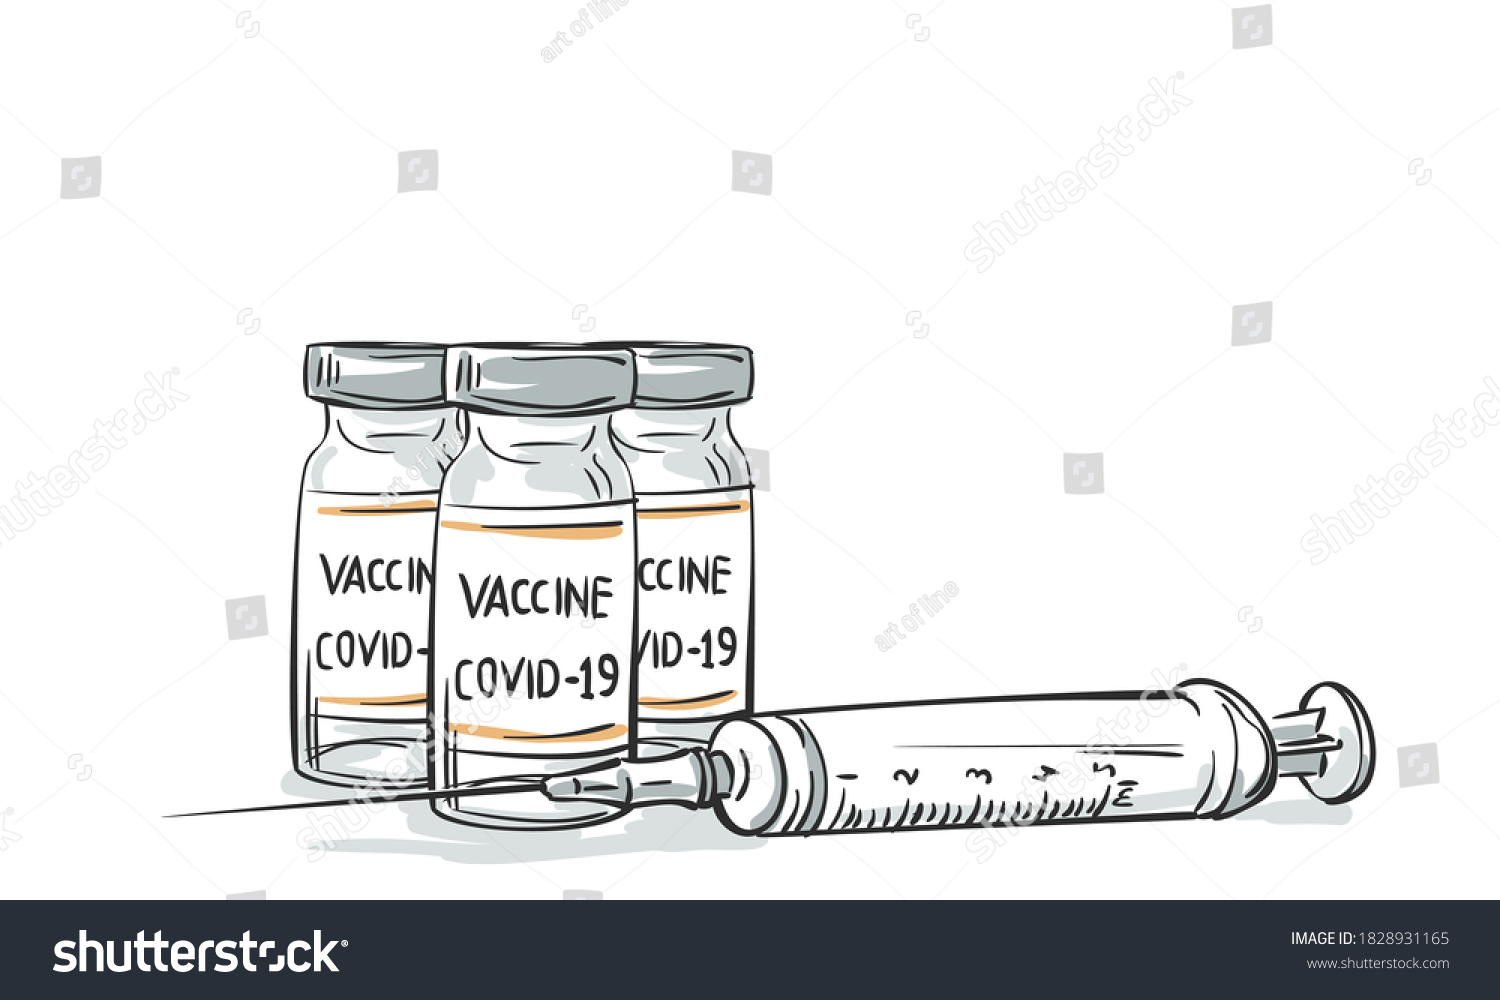 Coronavirus vaccine vials medicine bottles syringe vector drawing. Hand drawn ampoules for injection to fight against coronavirus. Vaccination, immunization, treatment 2019-ncov Covid-19  #1828931165